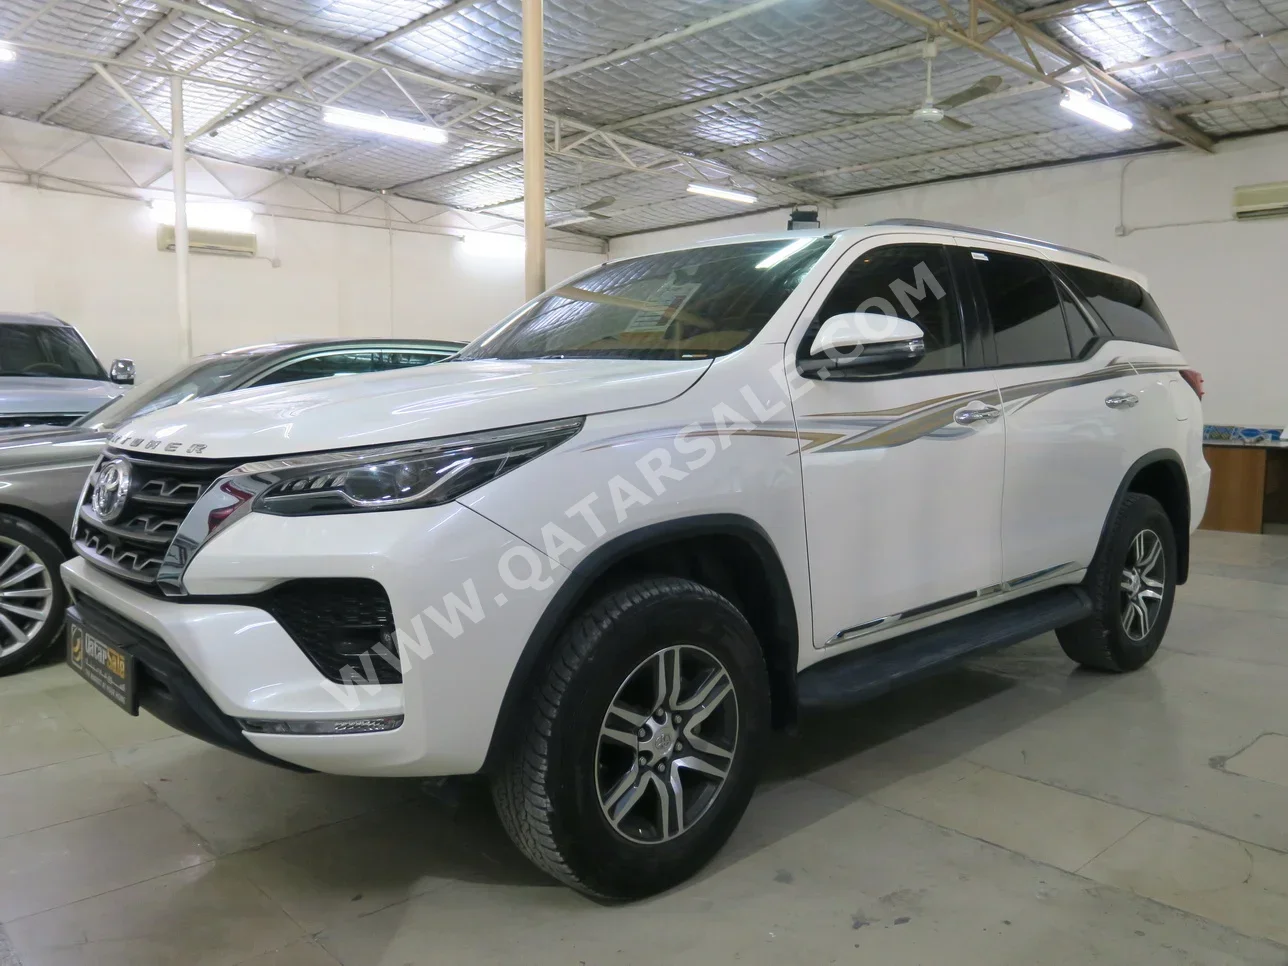 Toyota  Fortuner  2022  Automatic  40,000 Km  6 Cylinder  Four Wheel Drive (4WD)  SUV  White